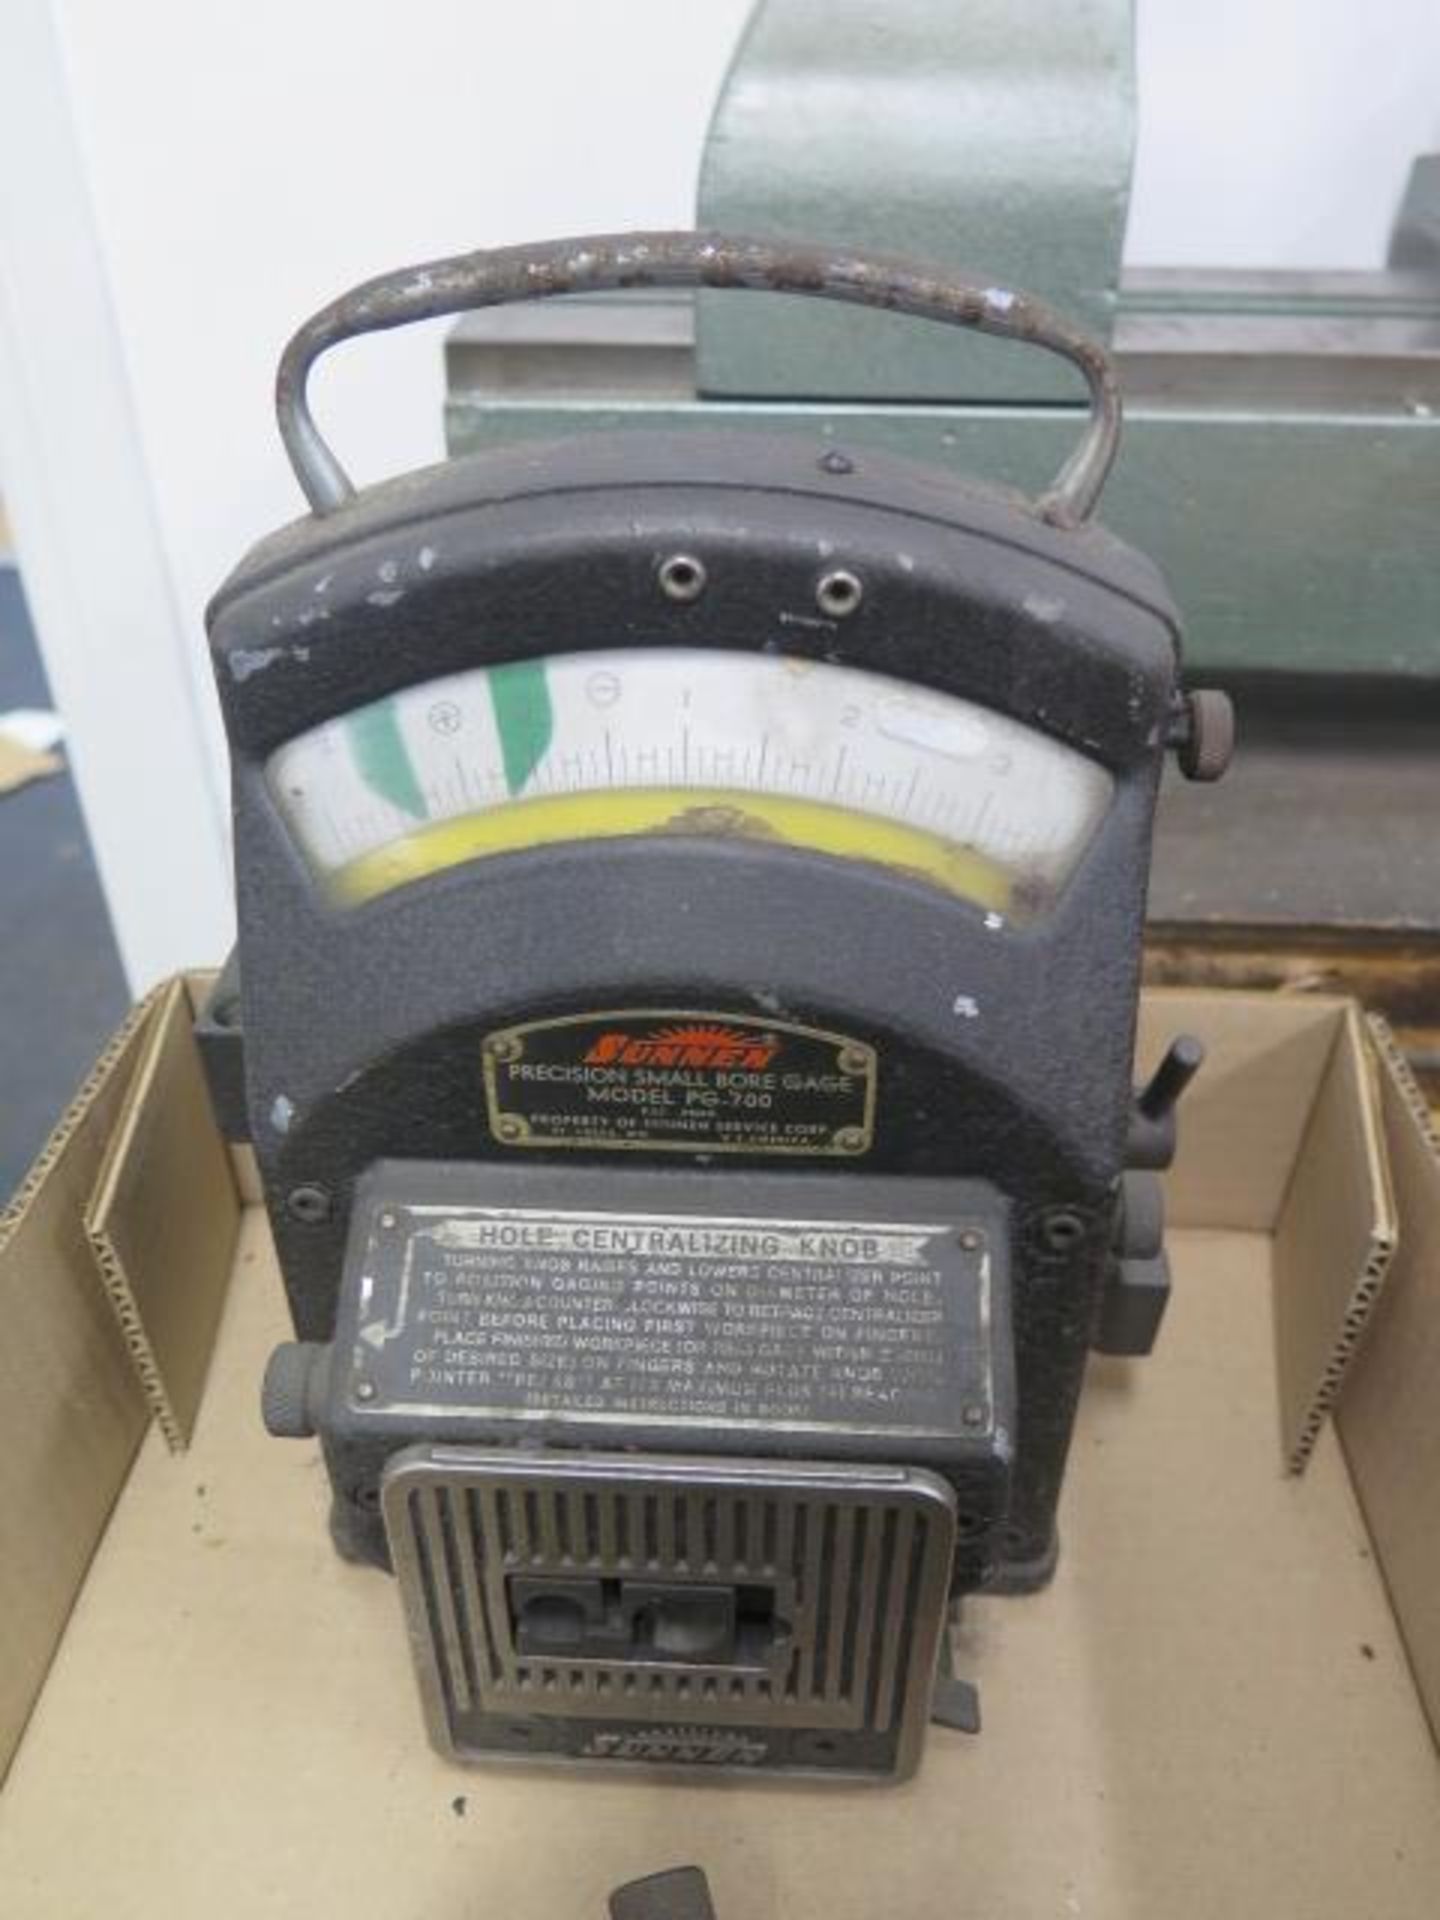 Sunnen PG-700 Precision Bore Gage w/ Sunnen PG-400S Setting Fixture (SOLD AS-IS - NO WARRANTY) - Image 2 of 7